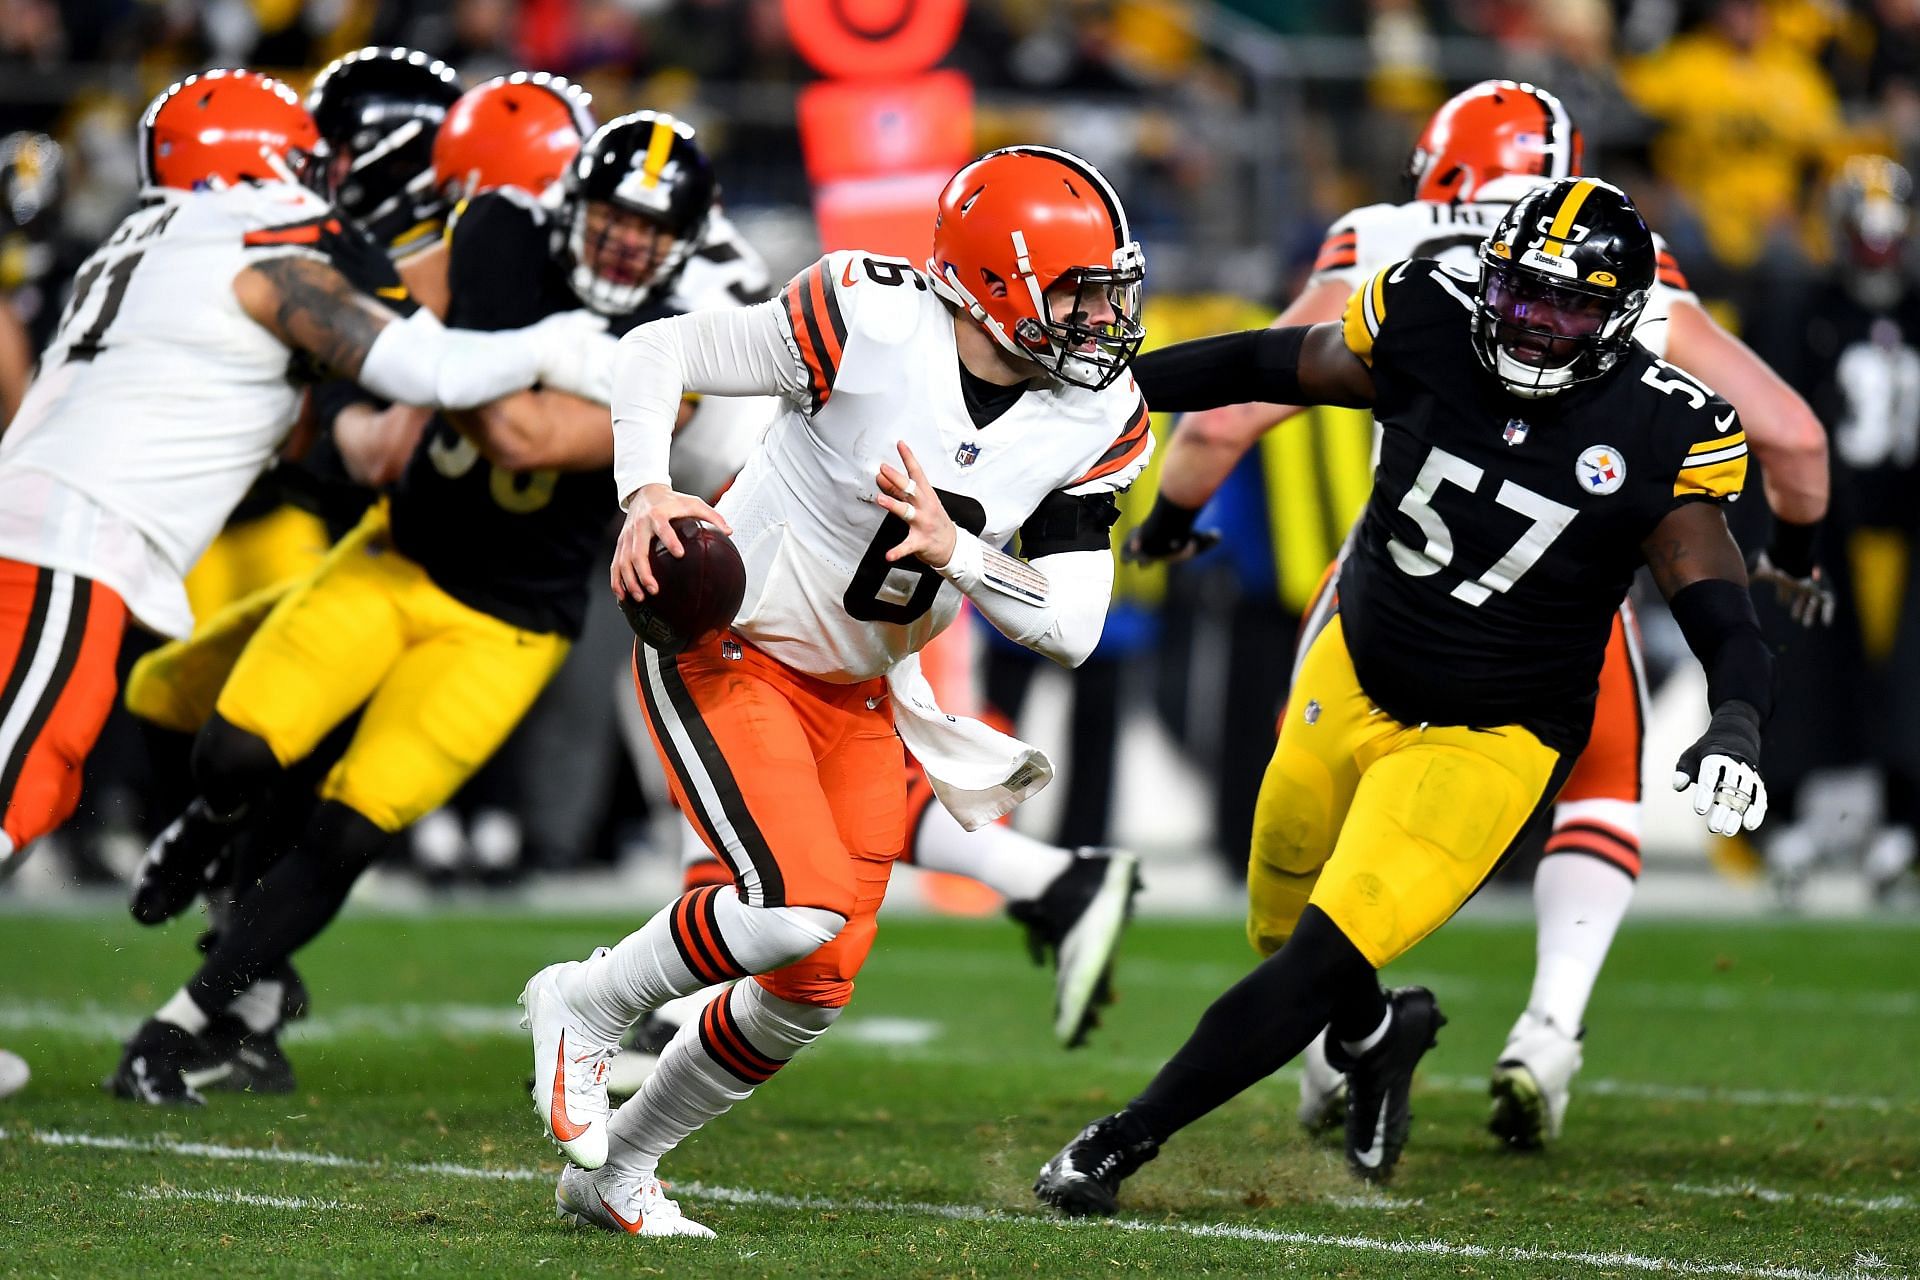 Mayfield on the run in the NFL&#039;s Monday night showcase between Cleveland and Pittsburgh (Photo: Getty)